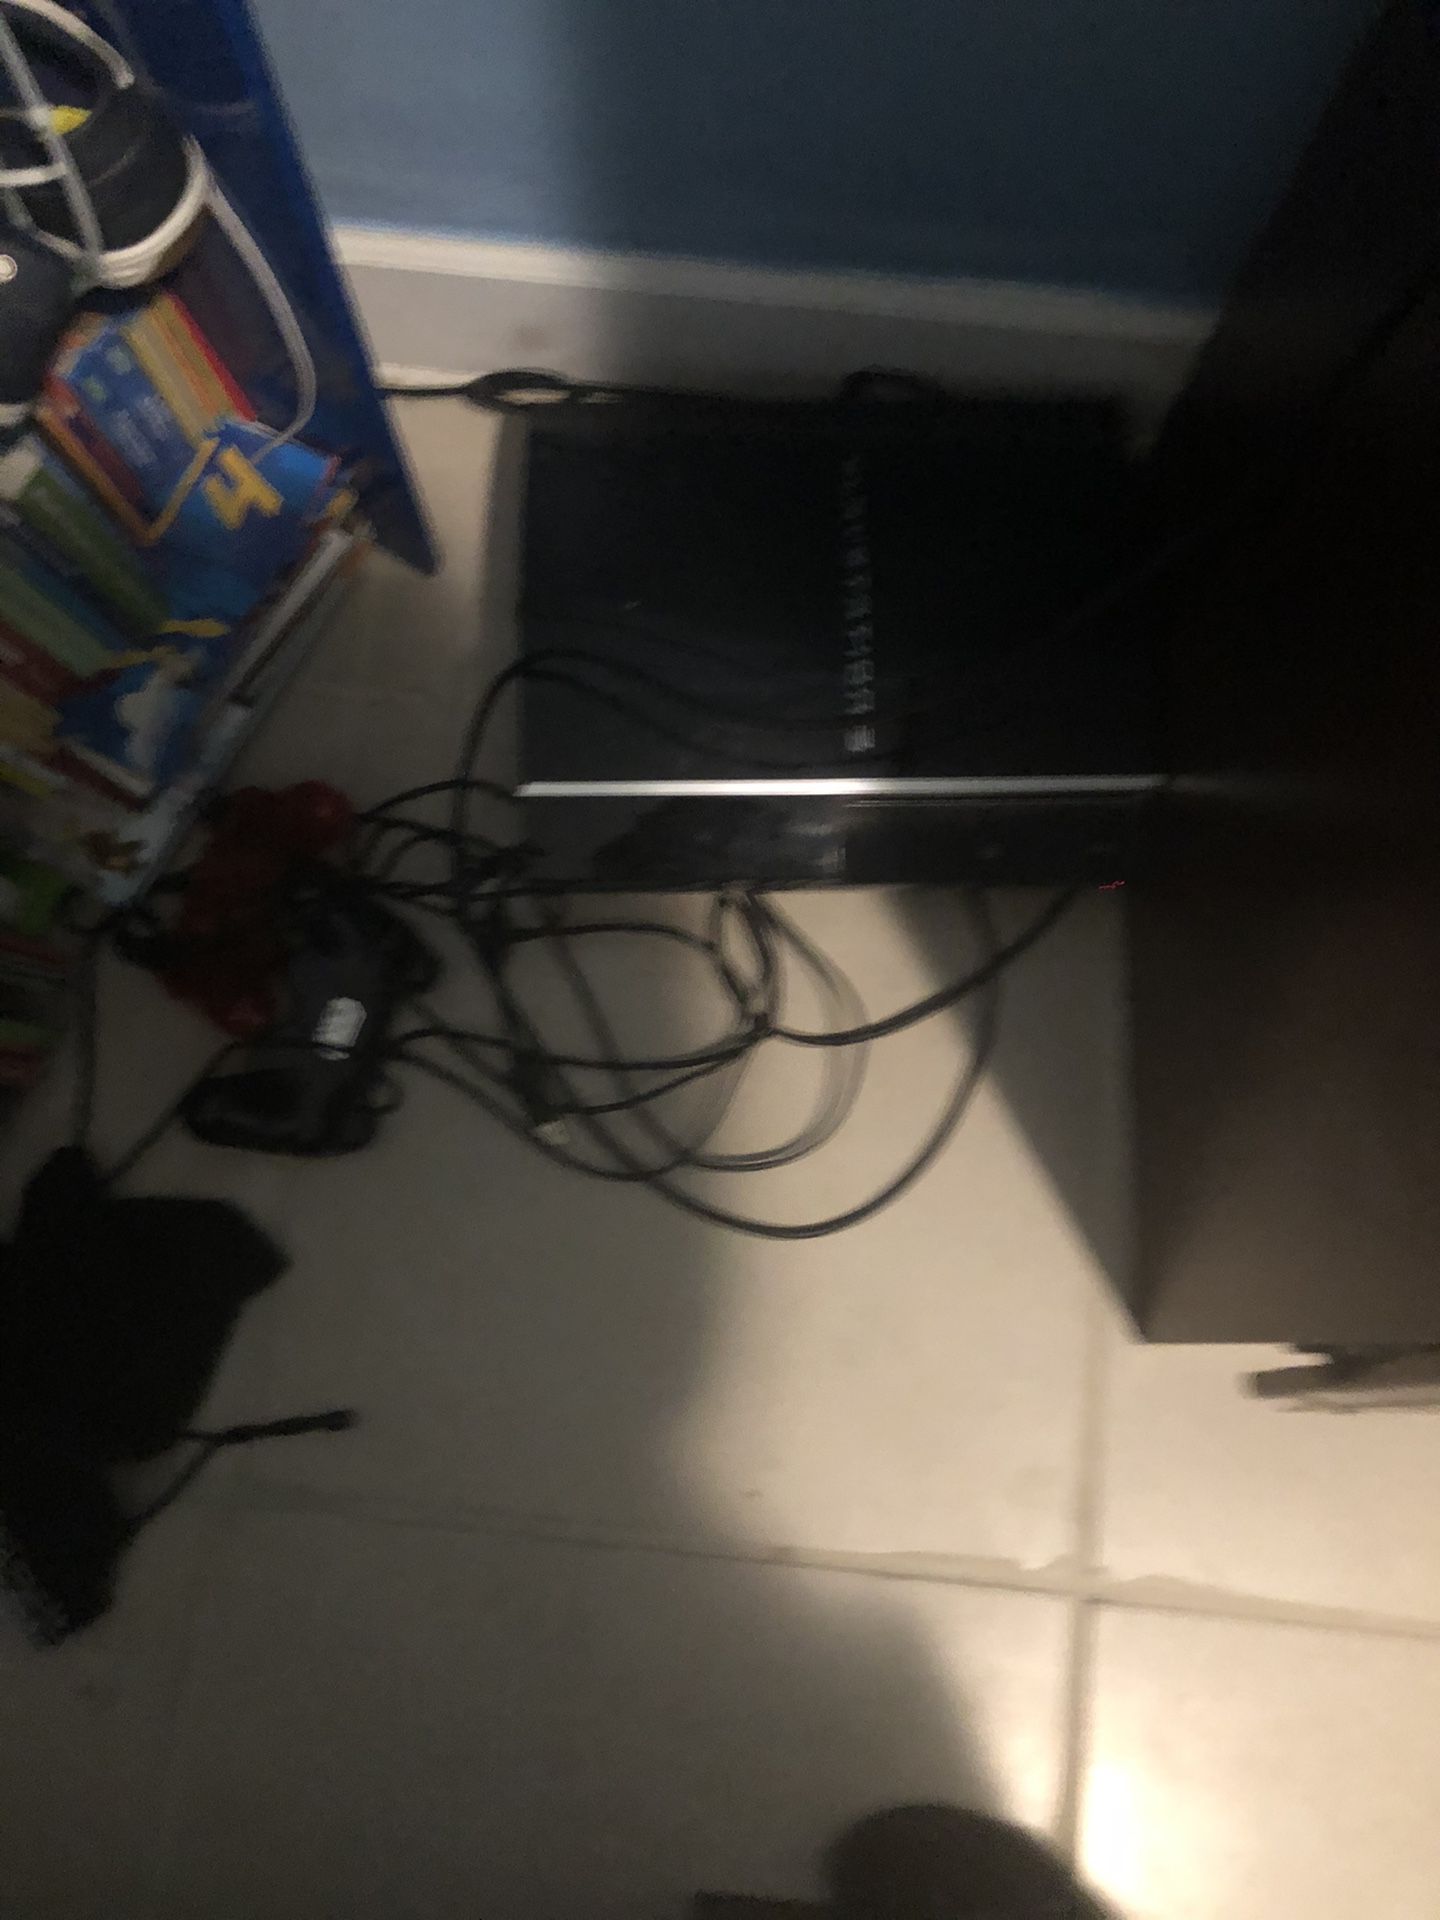 PS3 for sale $75 OBO